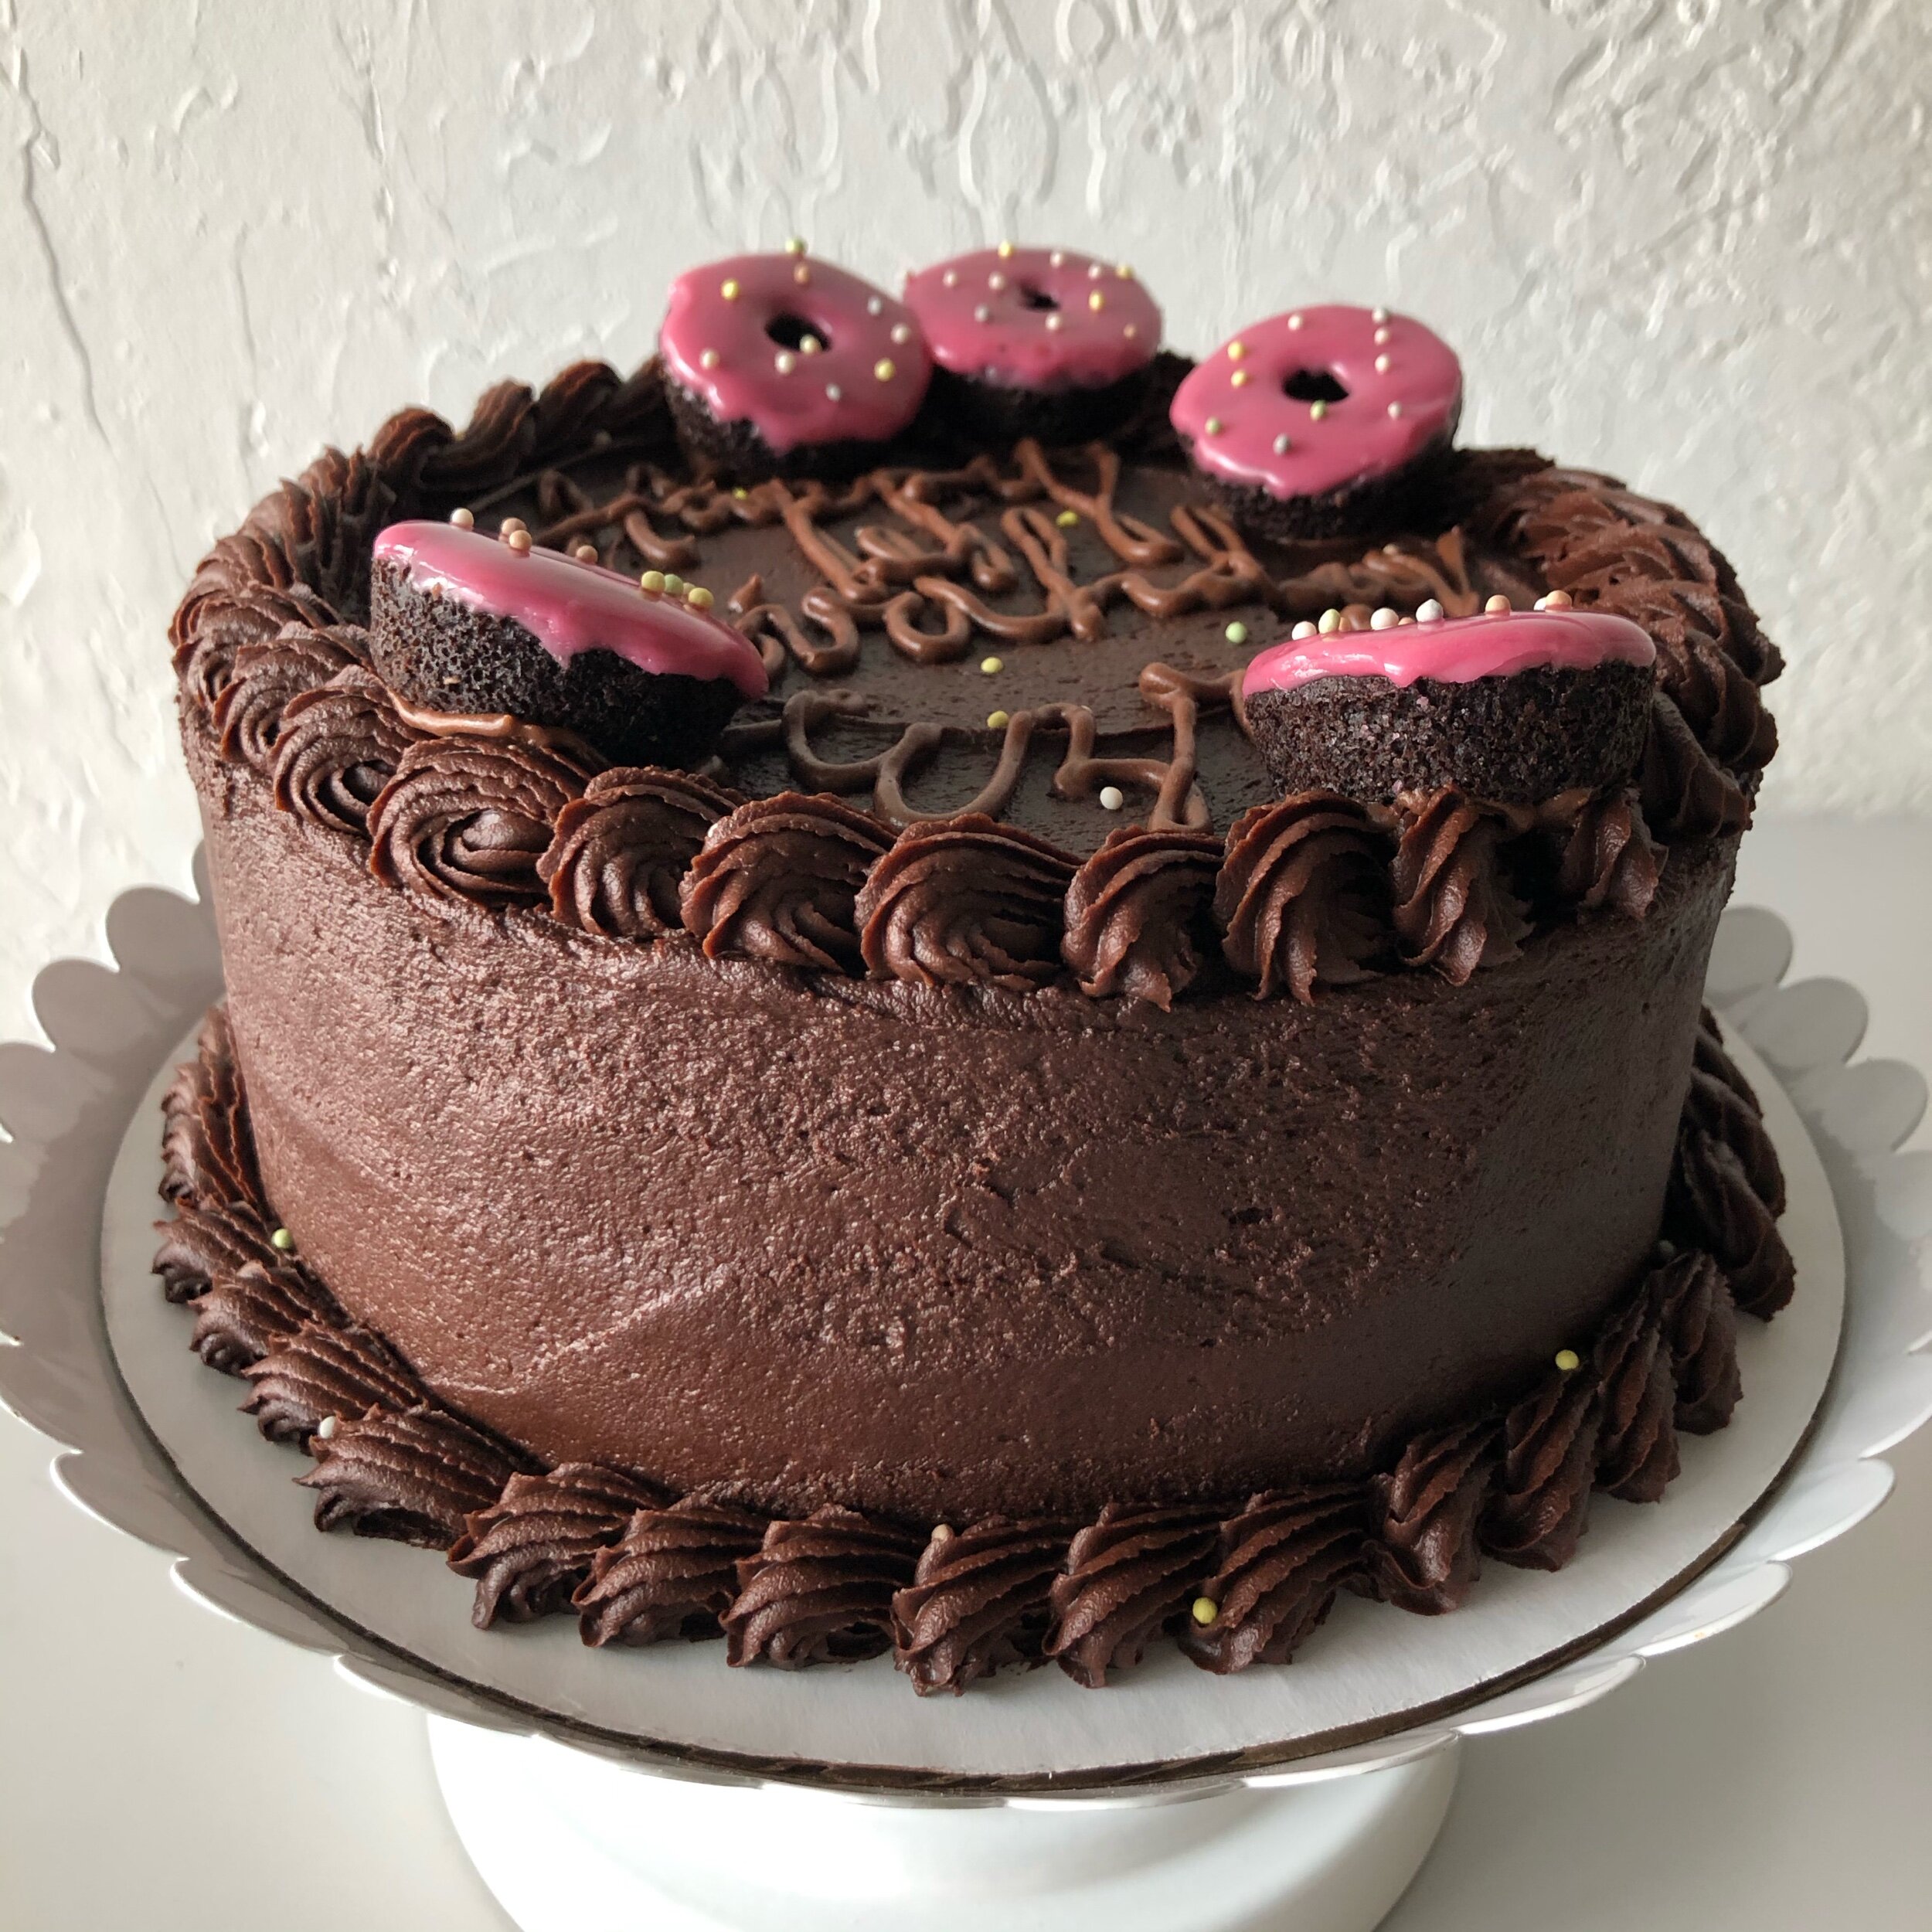  Chocolate Cake with added mini donuts 